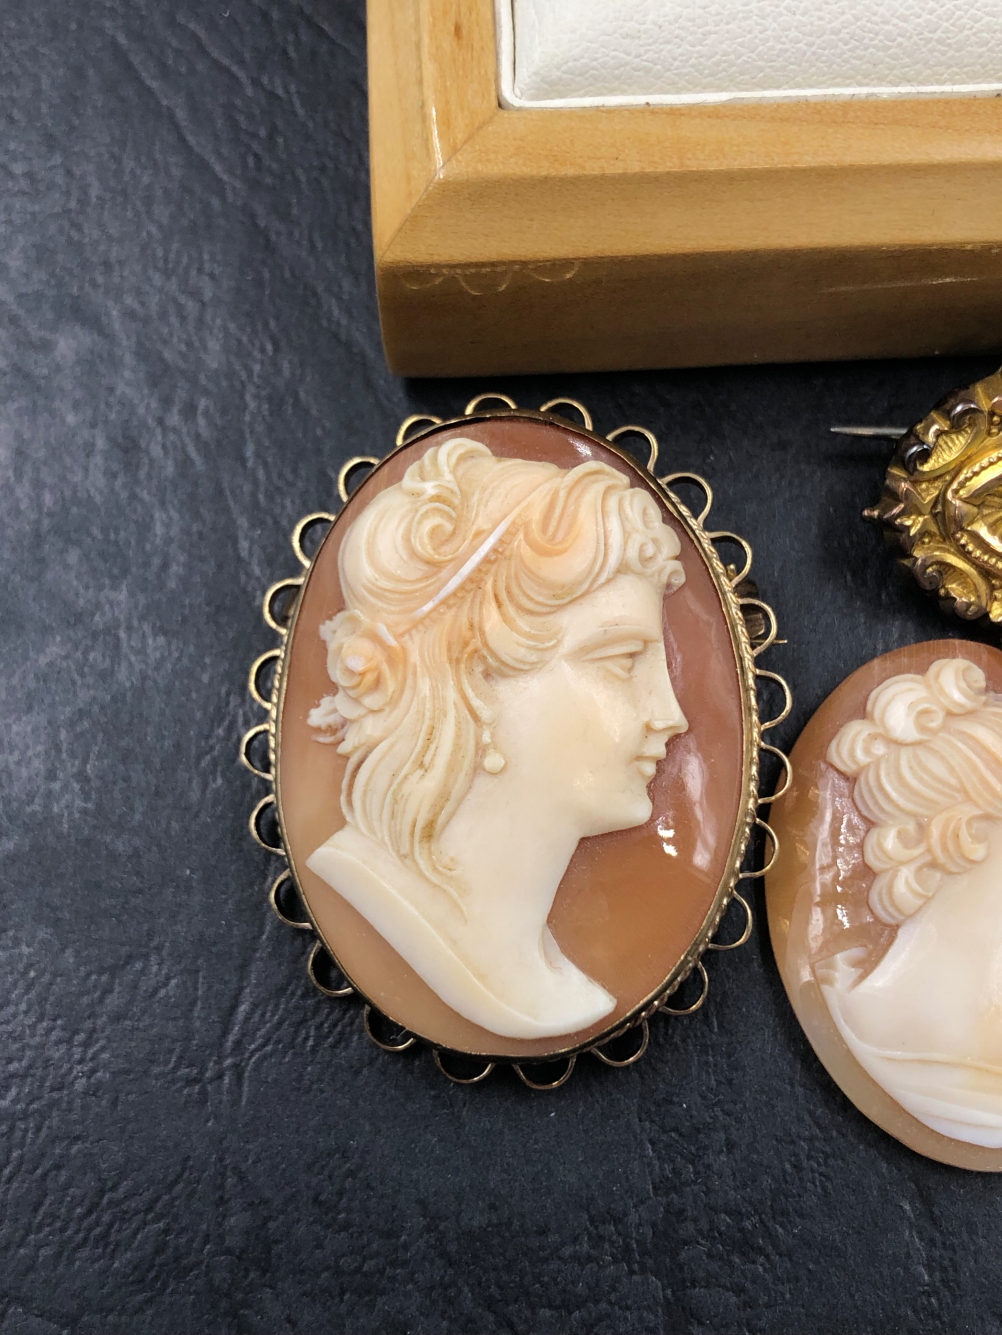 A HALLMARKED 9ct GOLD OVAL CAMEO PORTRAIT BROOCH, TOGETHER WITH A LOOSE CAMEO SHELL, A 9ct GOLD - Image 2 of 4